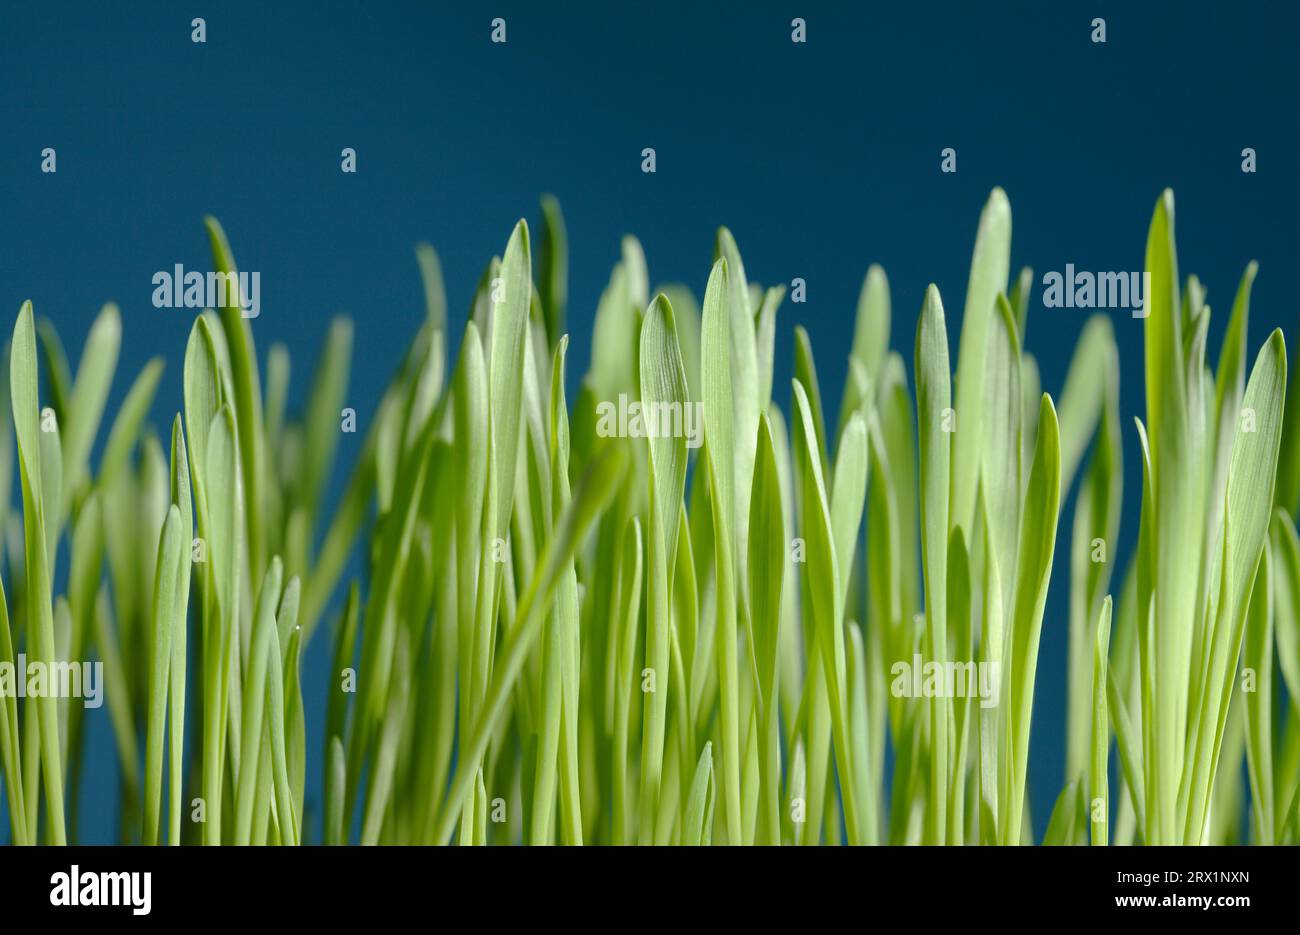 Young barley seedlings against blue background Stock Photo